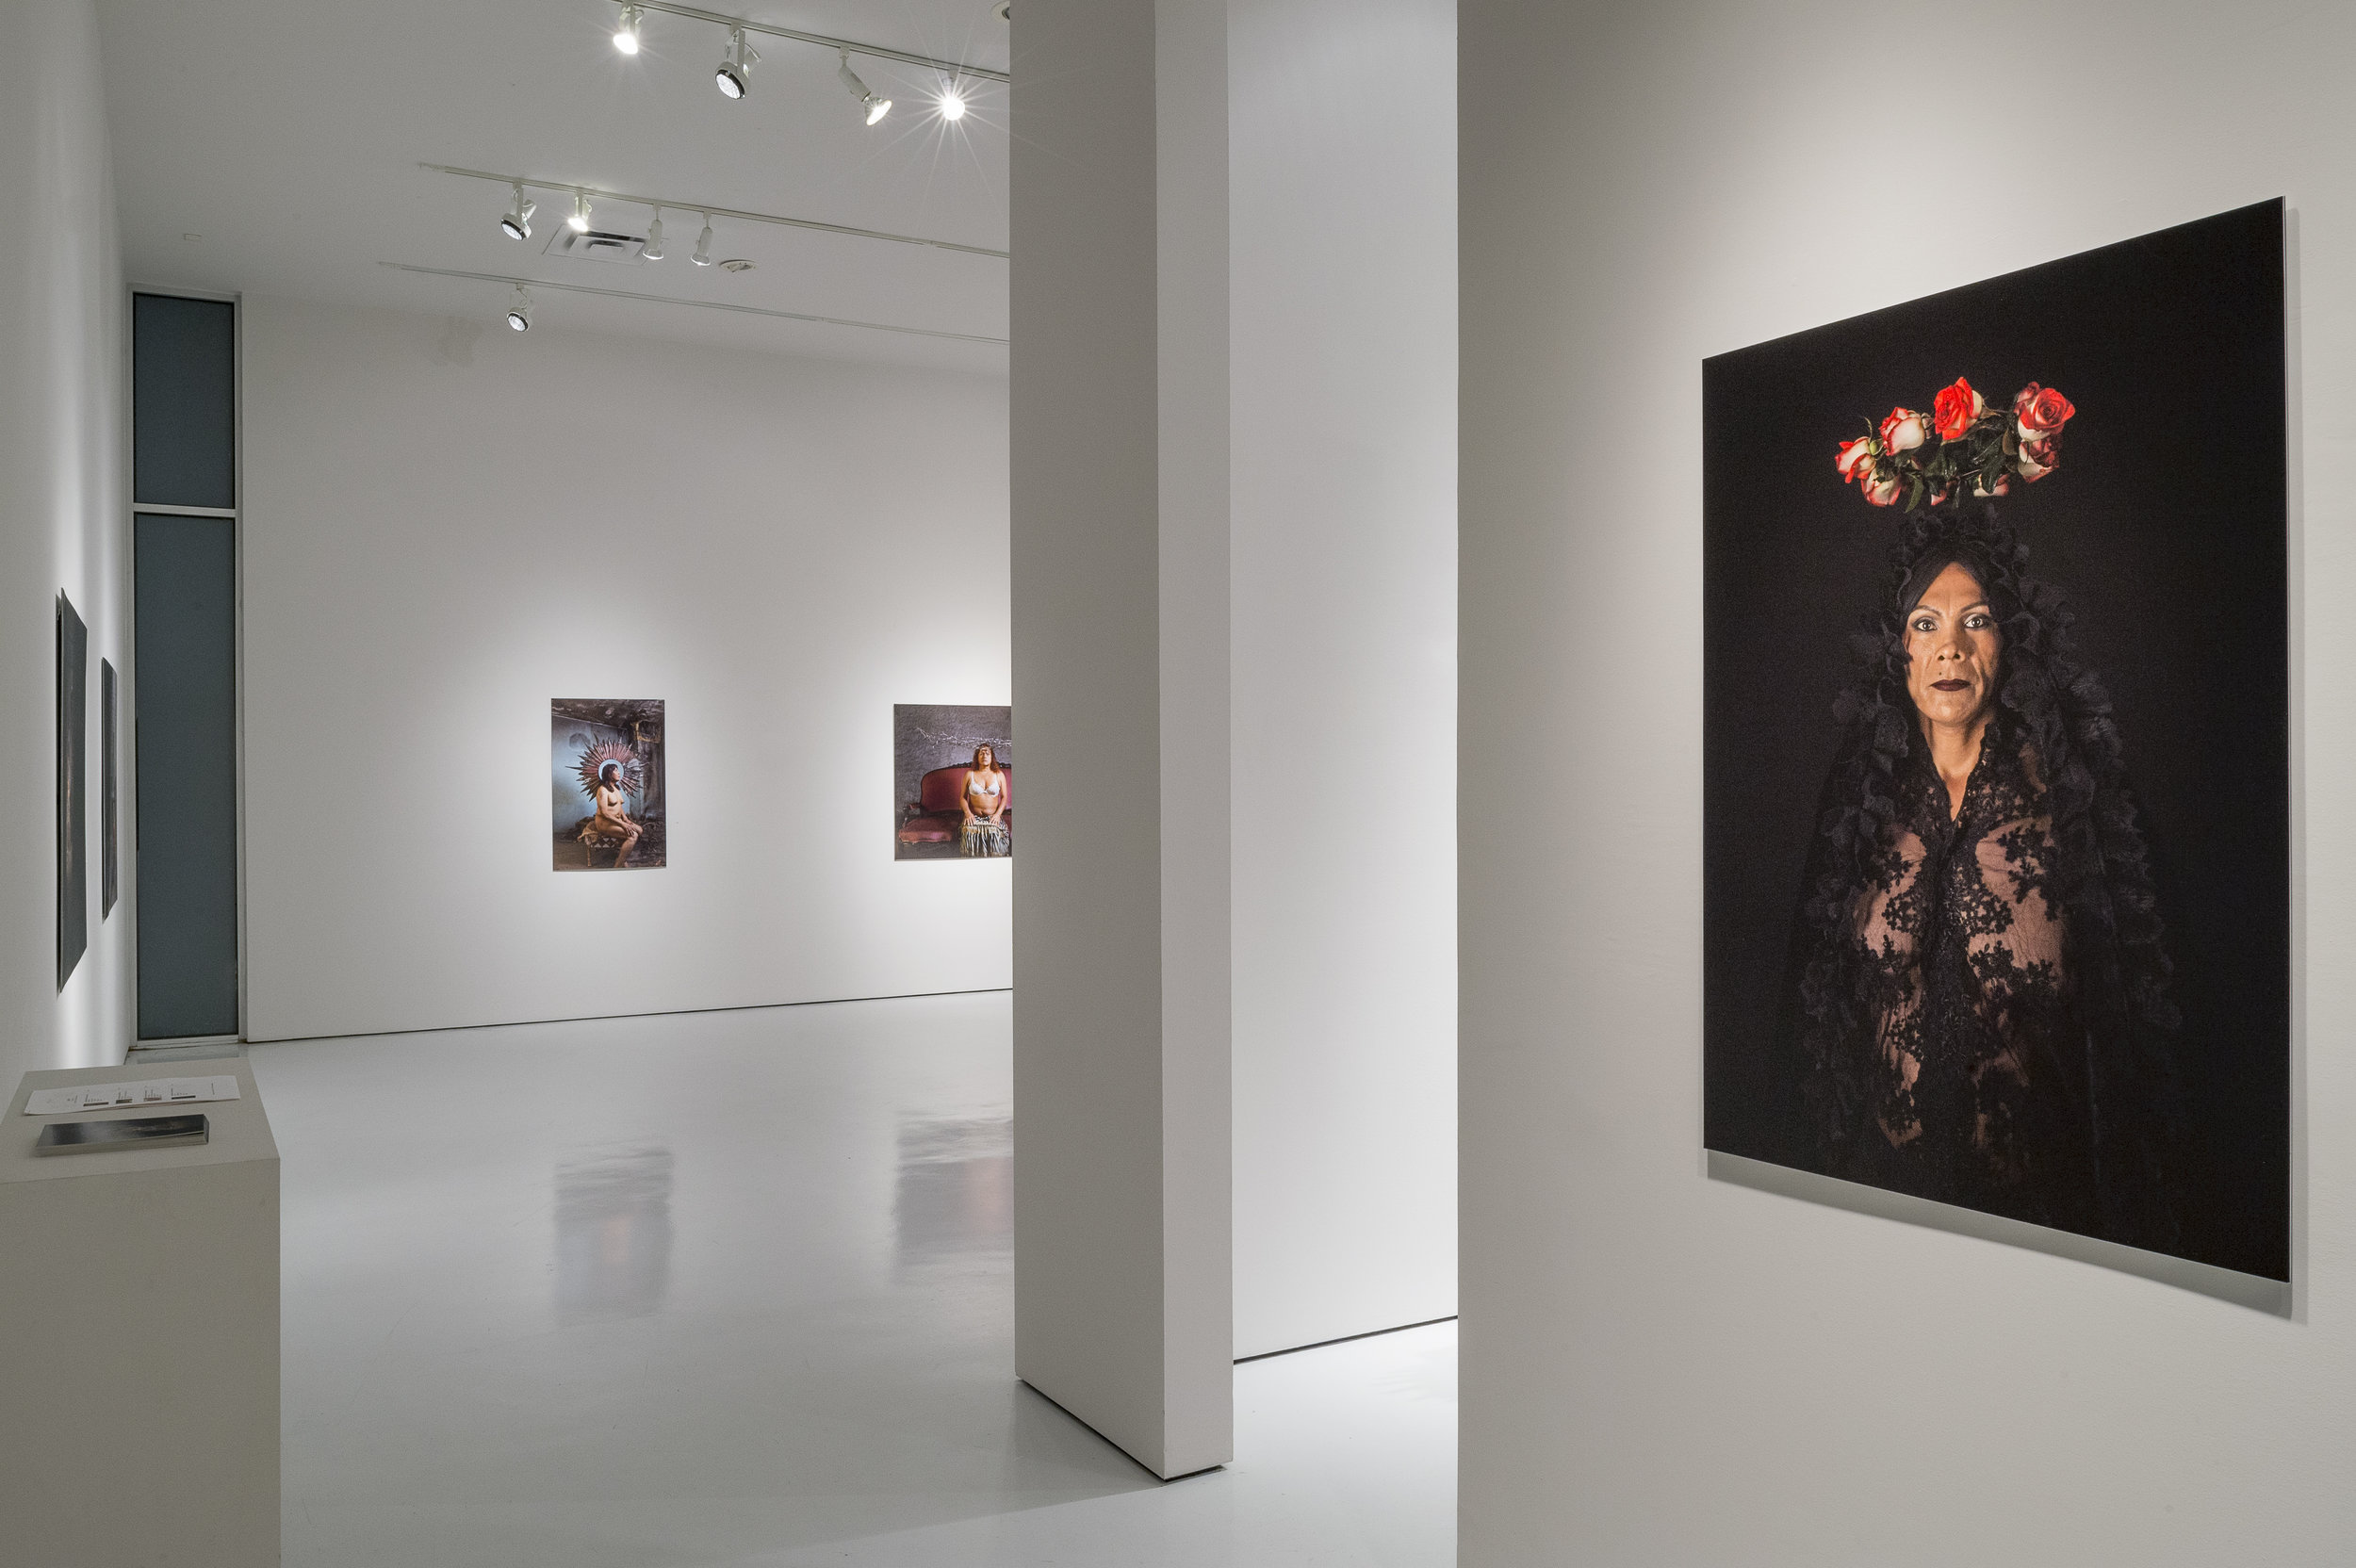     Installation view of "Canon" at the McClain Gallery, Houston, TX.&nbsp;(Photo Credit: Nash Baker) 